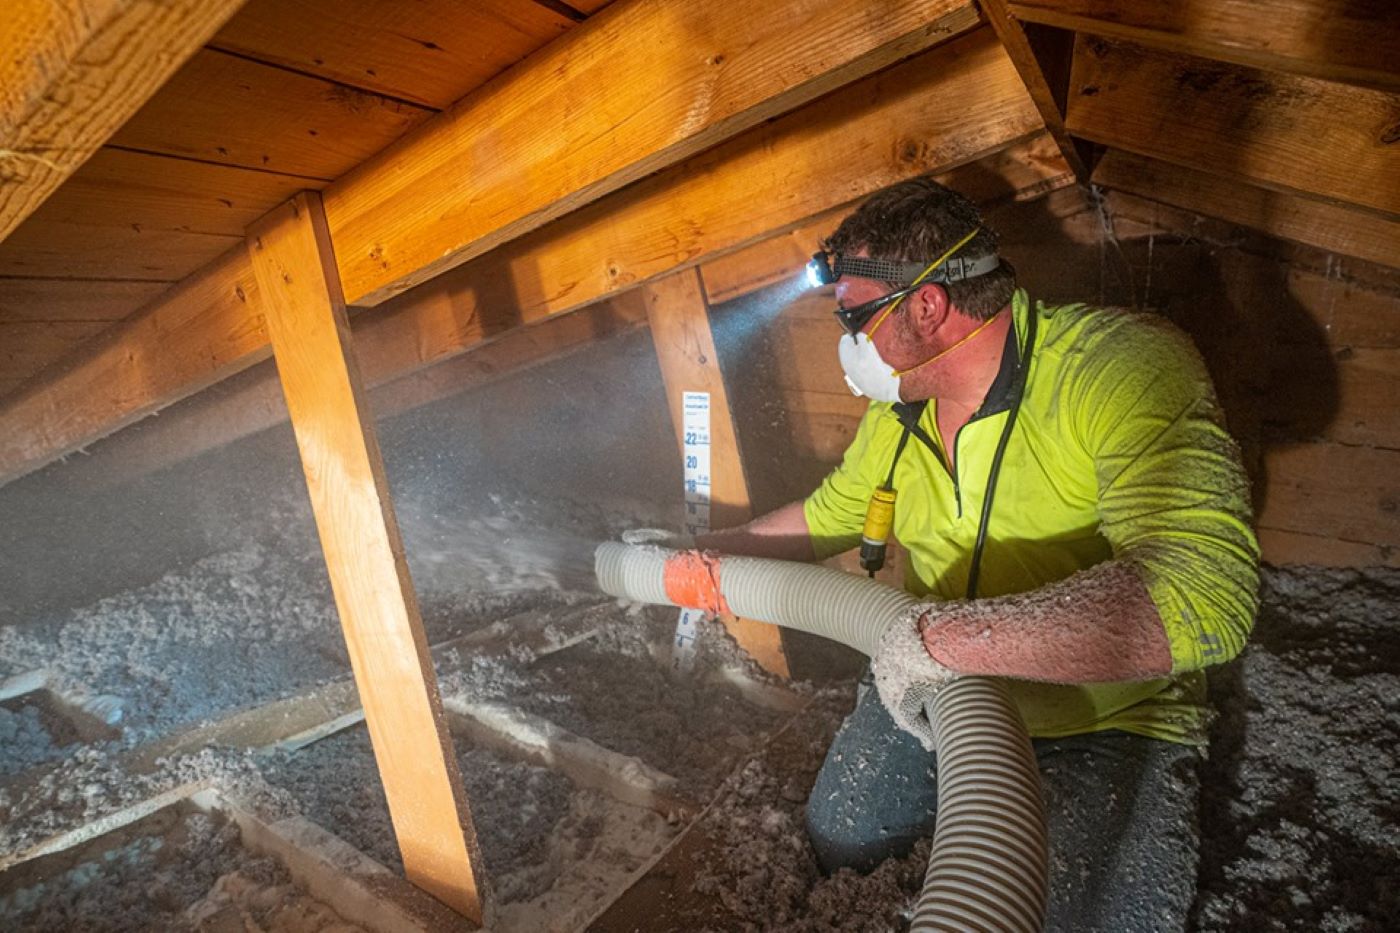  Lindus Construction team member installing blown-in insulation in a home